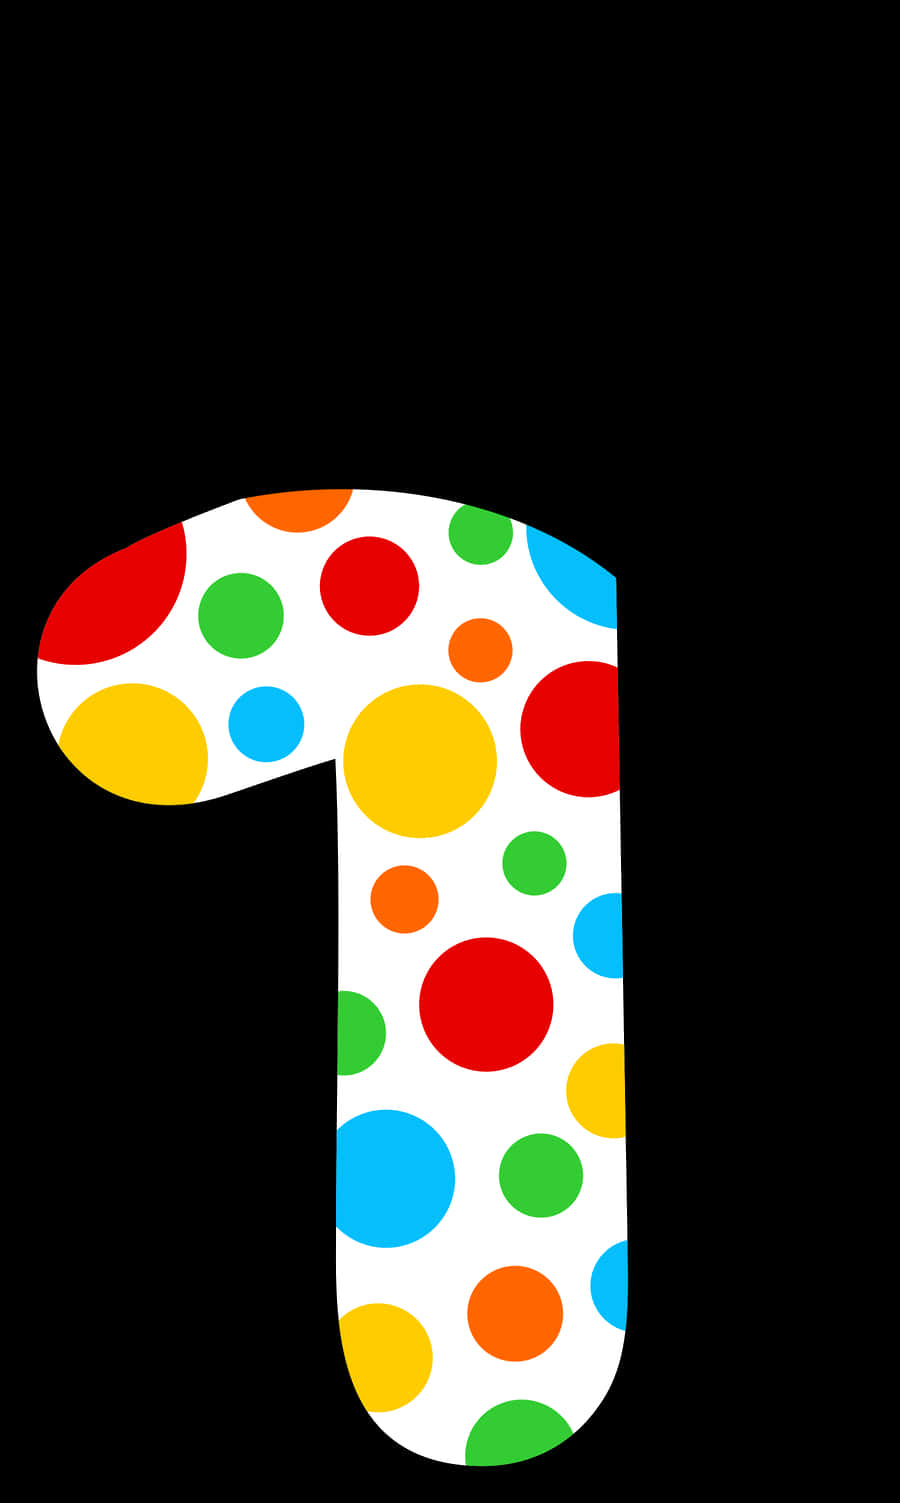 A Number With Colorful Dots On It